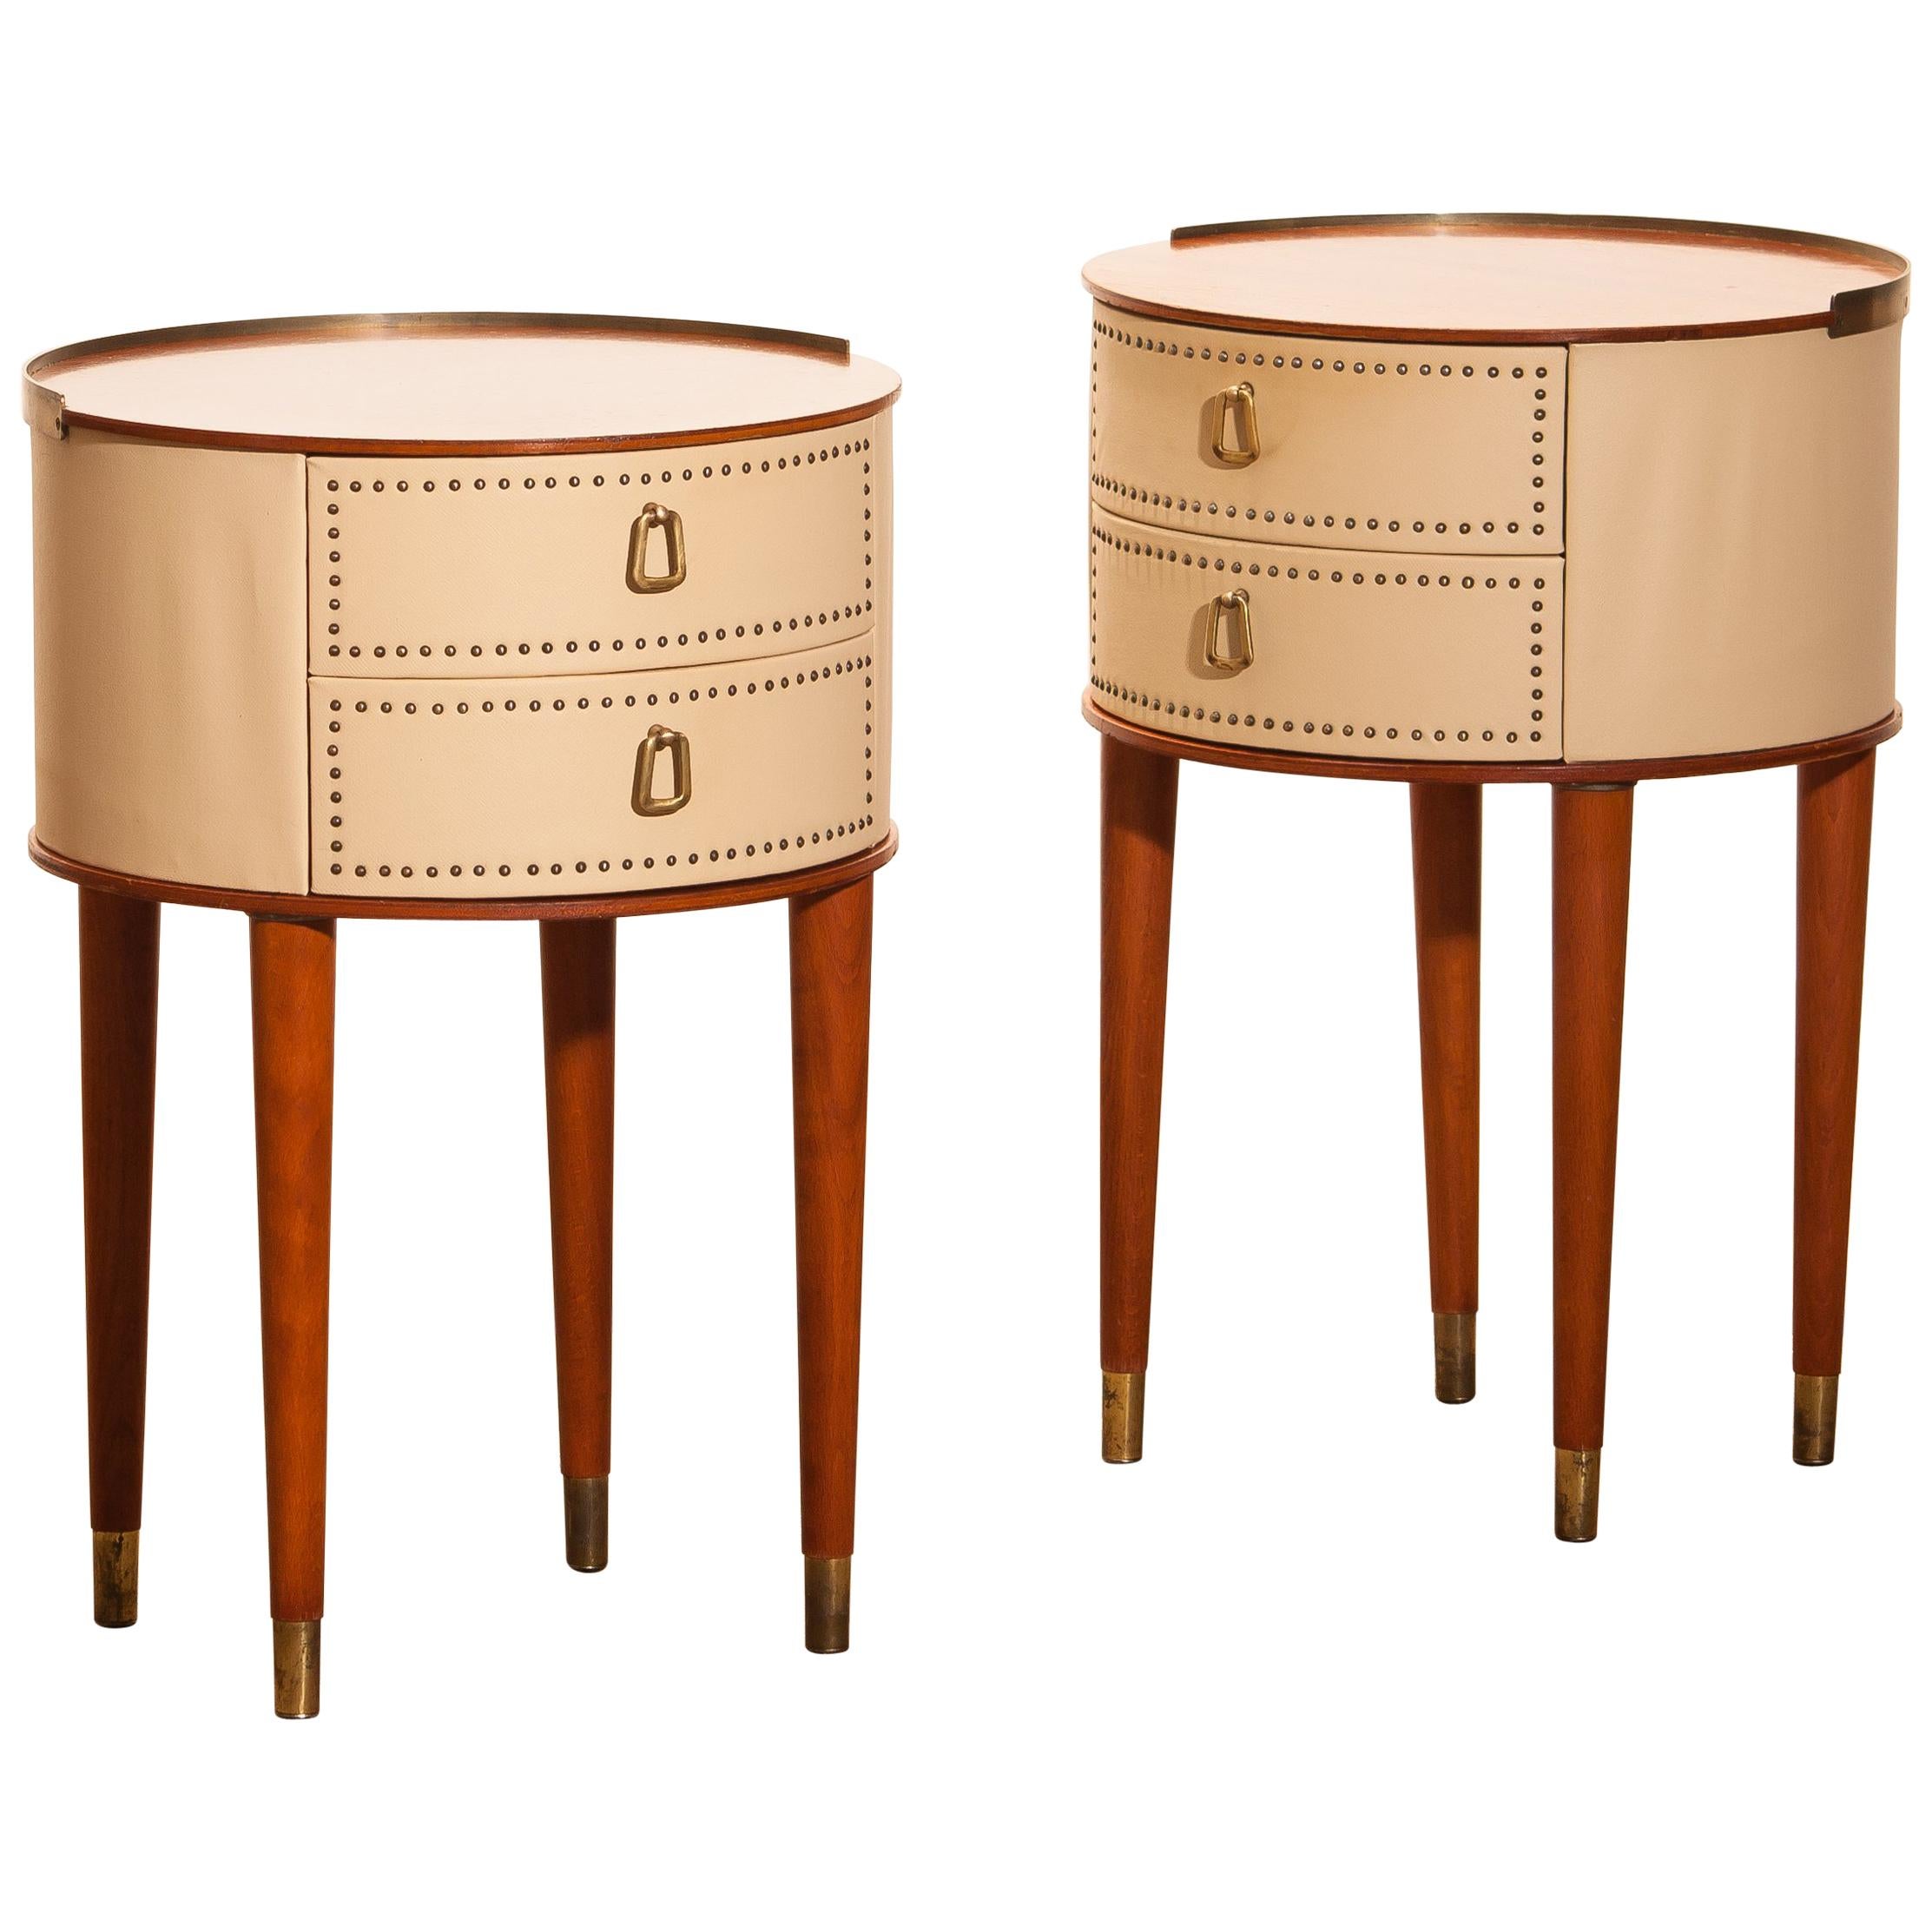 1950s, mahogany / brass and vinyl, bedside tables or nightstands, on high legs designed by Halvdan Pettersson in the 1950s for Tibro Möbelfabrik Sweden. This set nightstands is in good condition.

Period: 1950s
Measures: The bedside tables are ø